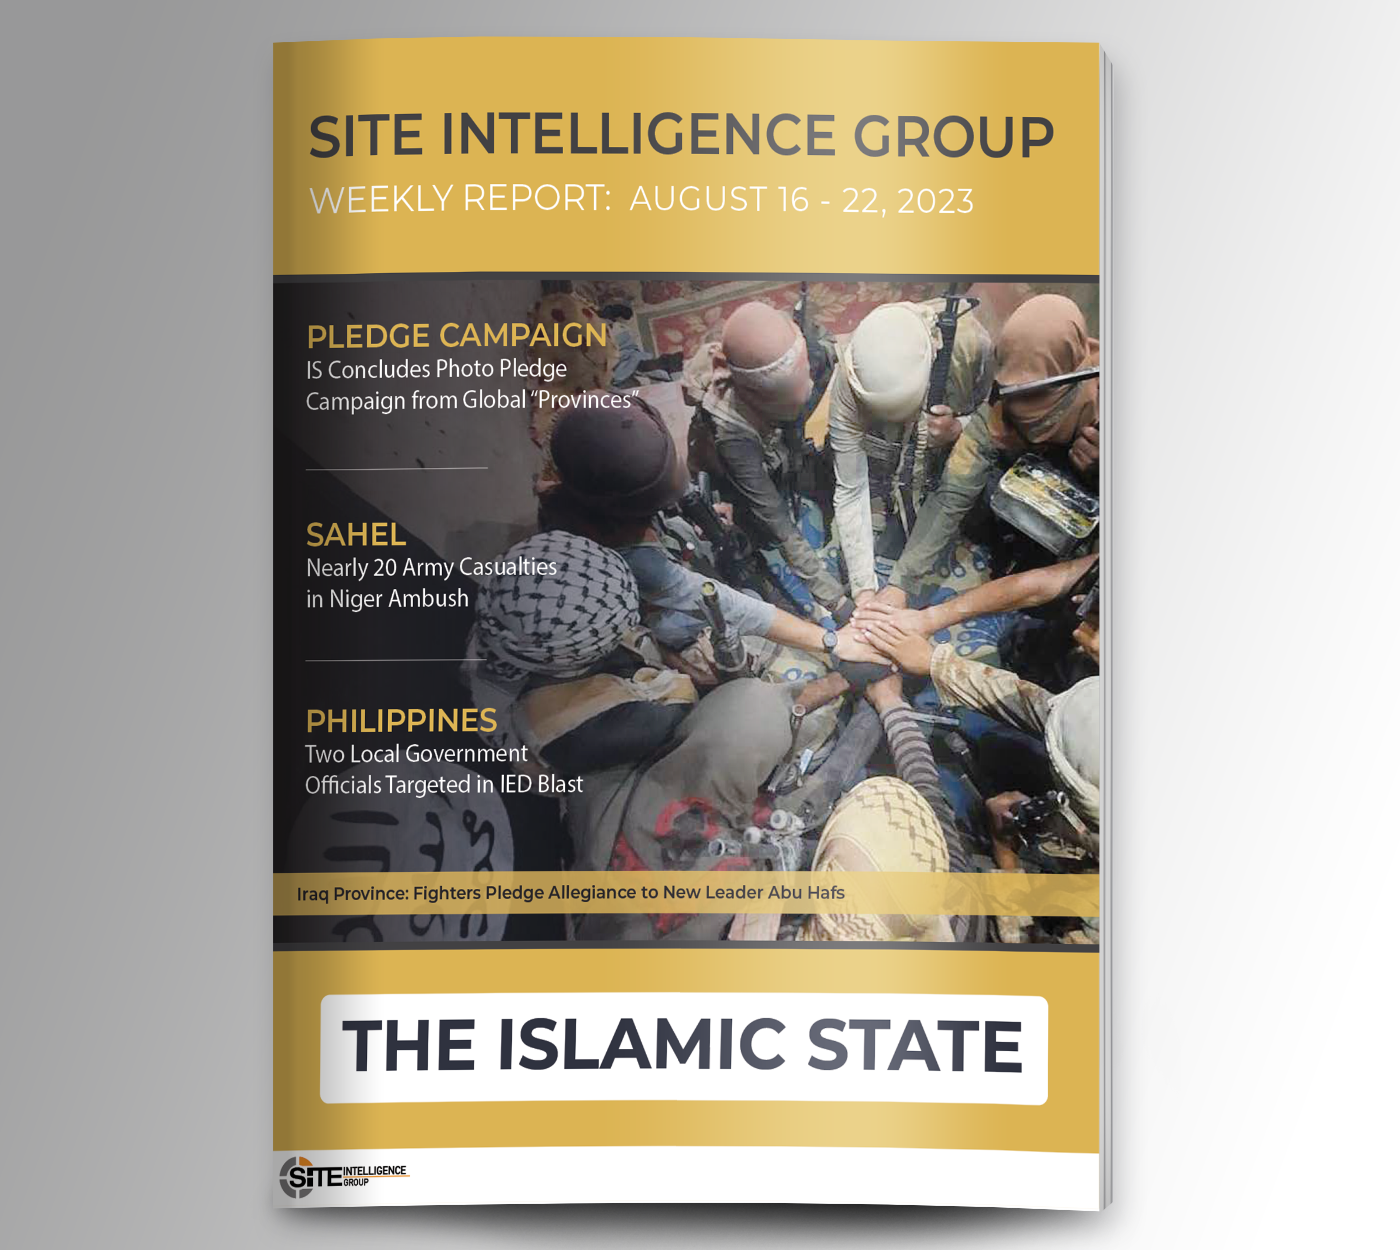 Weekly inSITE on the Islamic State for August 16-22, 2023